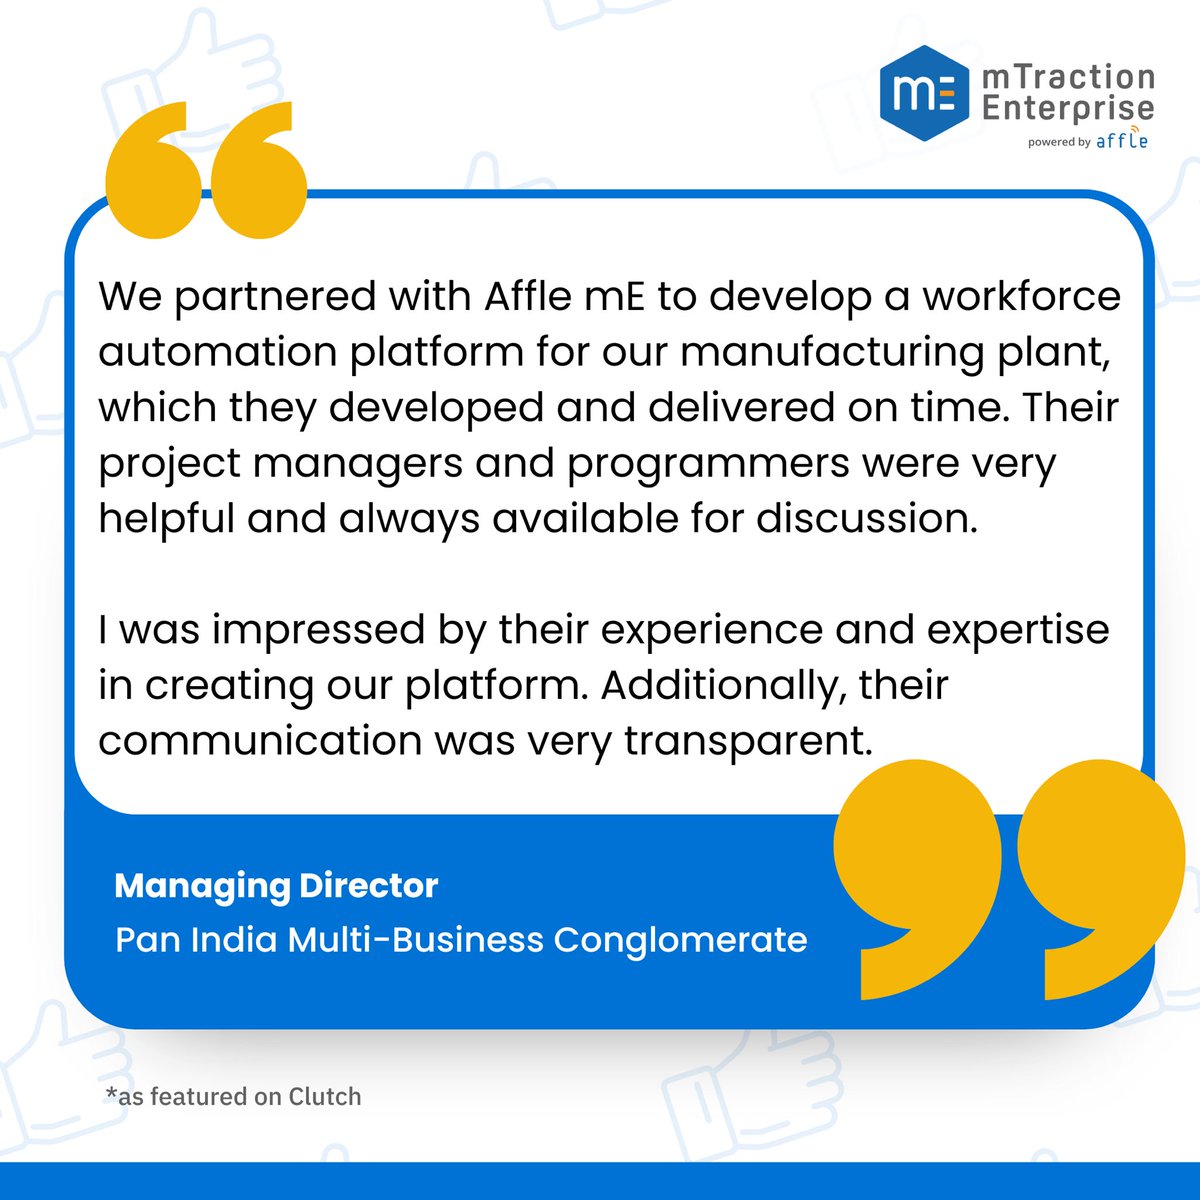 #ClientAppreciation gives us motivation & zeal to perform better. We’re proud to be the trusted partner for a Pan-India Multi business conglomerate’s manufacturing plant. #Partnerships
Read here- lnkd.in/gPxvdEFj 

#clientfeedback #DigitalTransformation #TestimonialTuesday